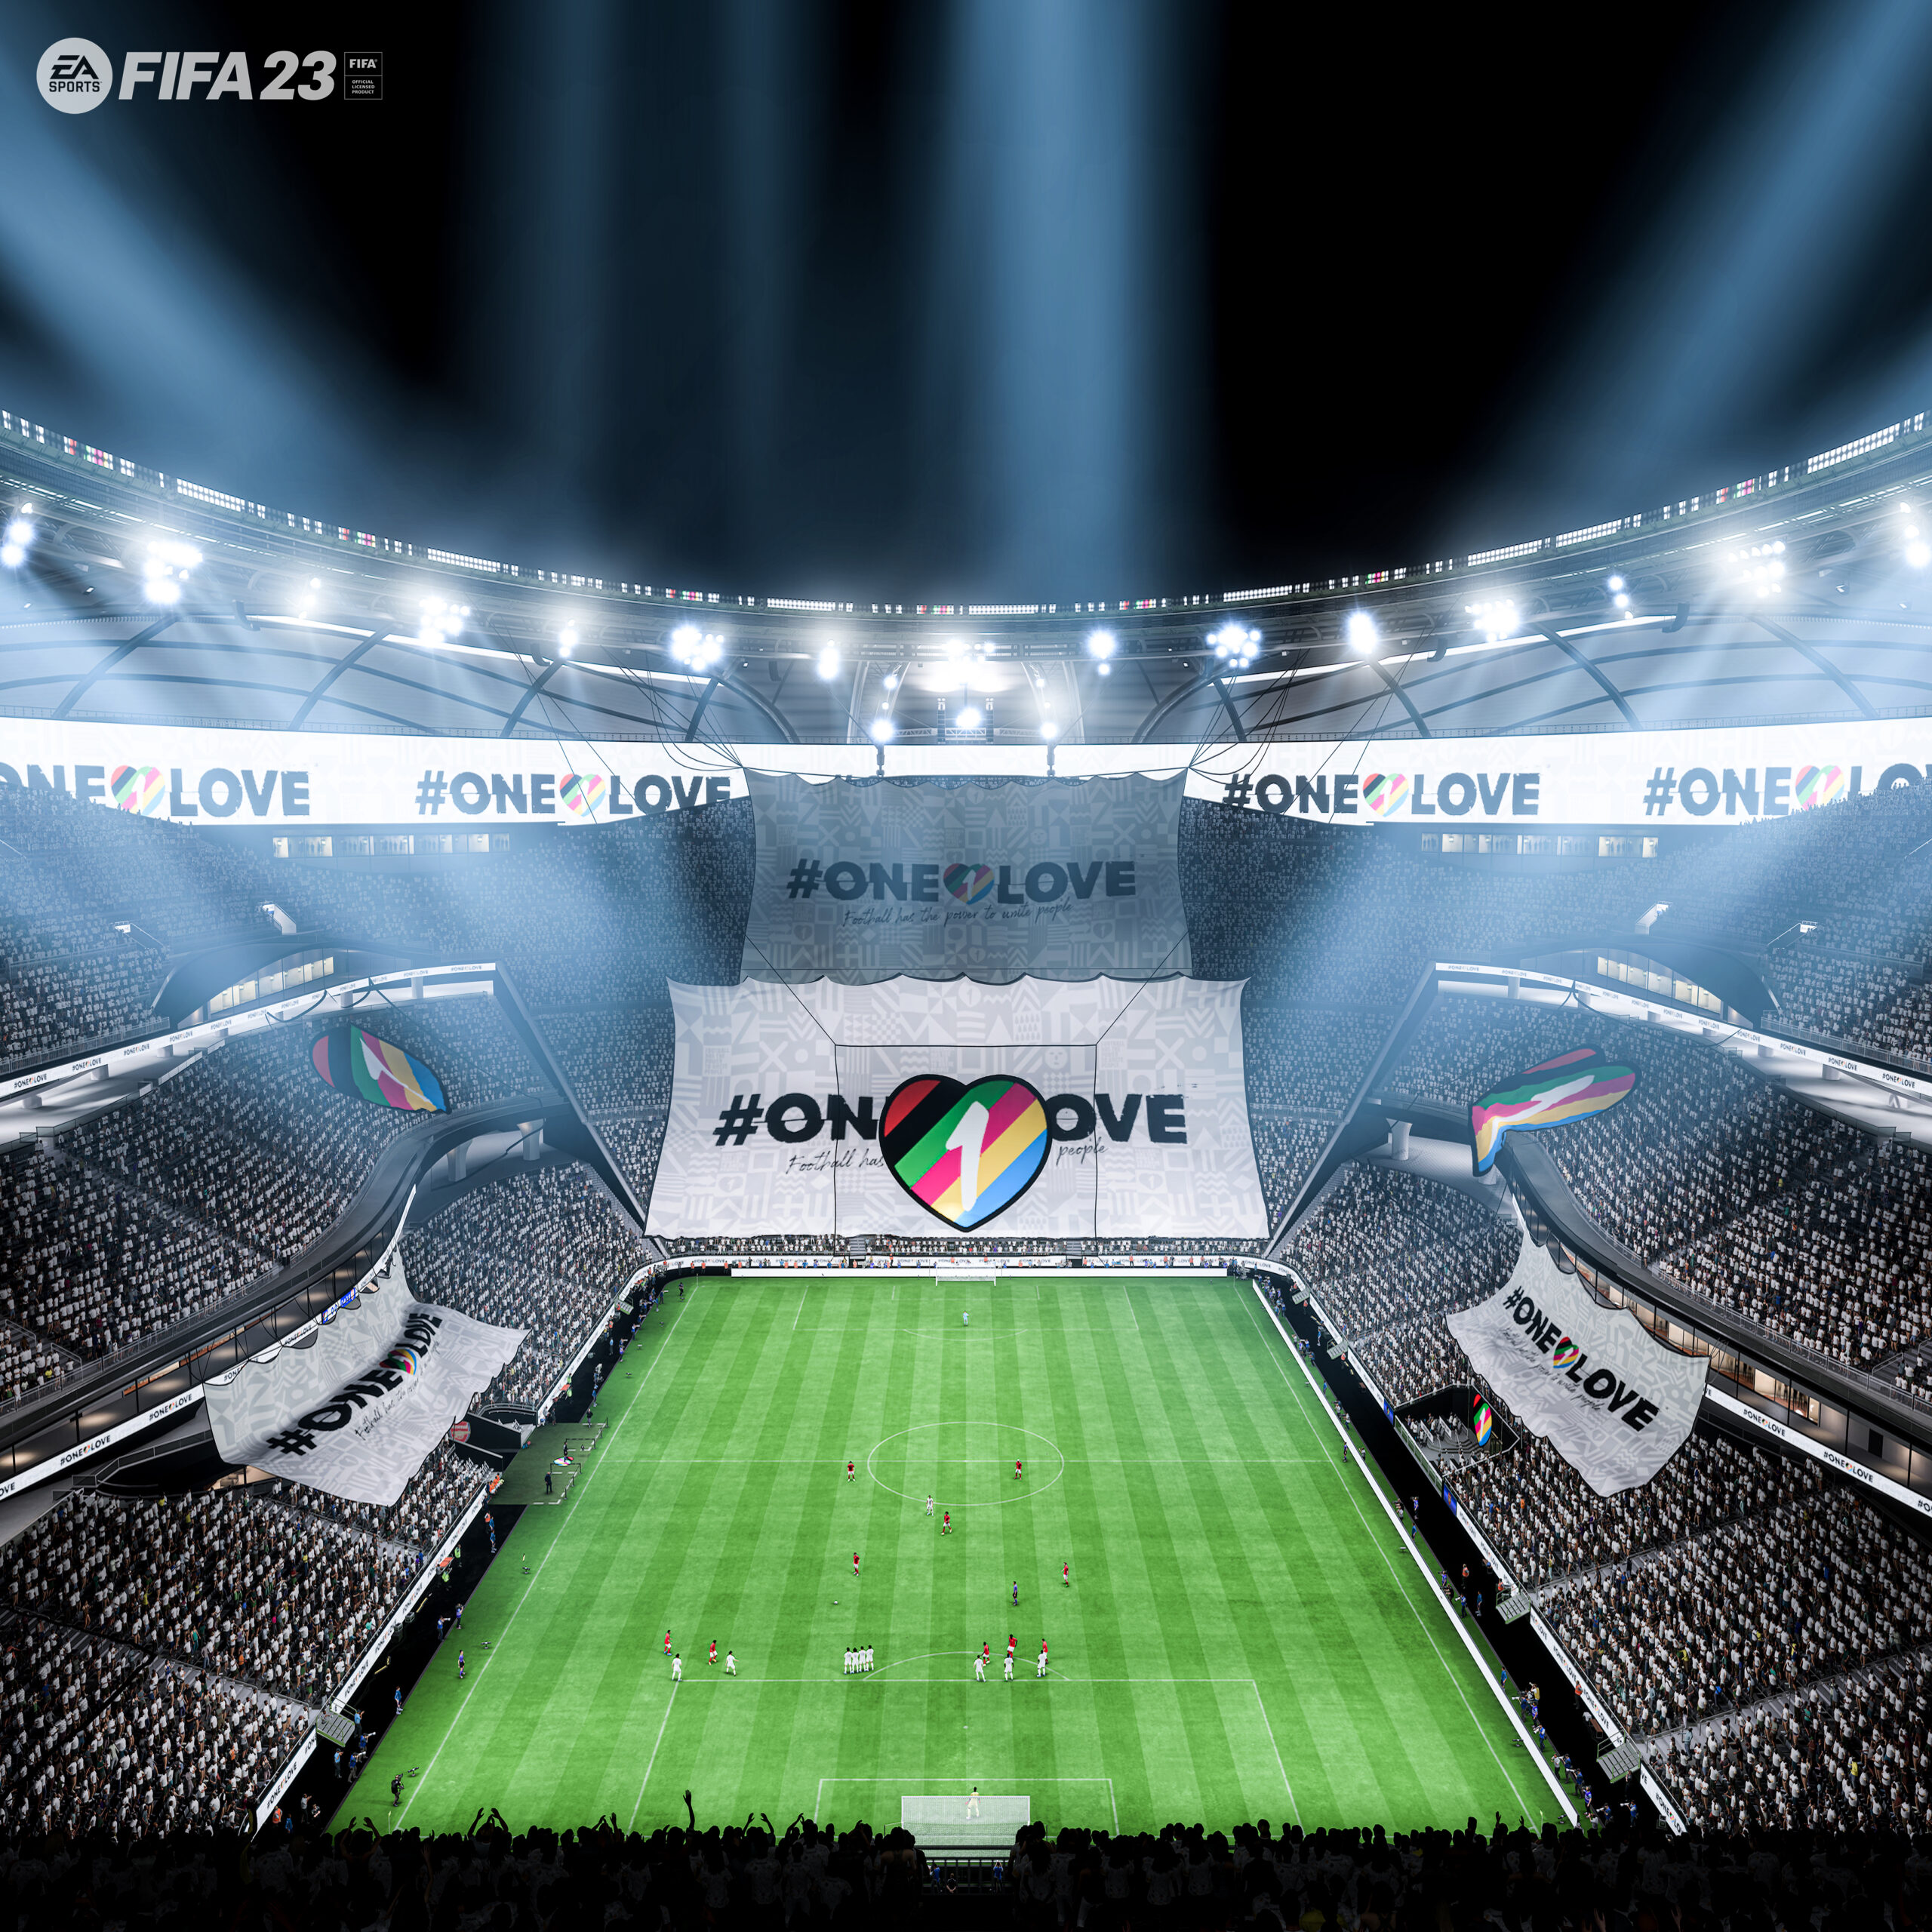 A stadium decorated with Dutch KNVB and Eredivisie leagues' "One Love" campaign banners via FIFA 23 (2022), EA Sports